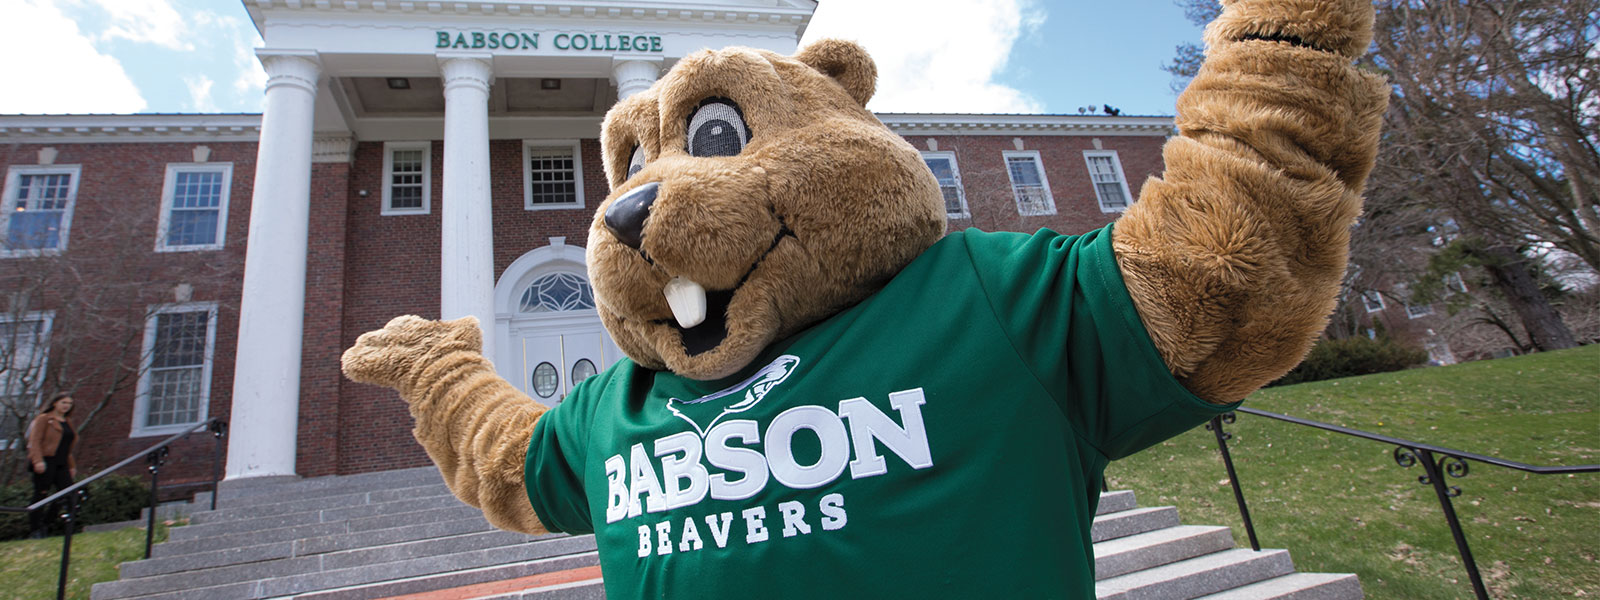 Image of Biz E beaver Mascot in front of Tomasso Hall